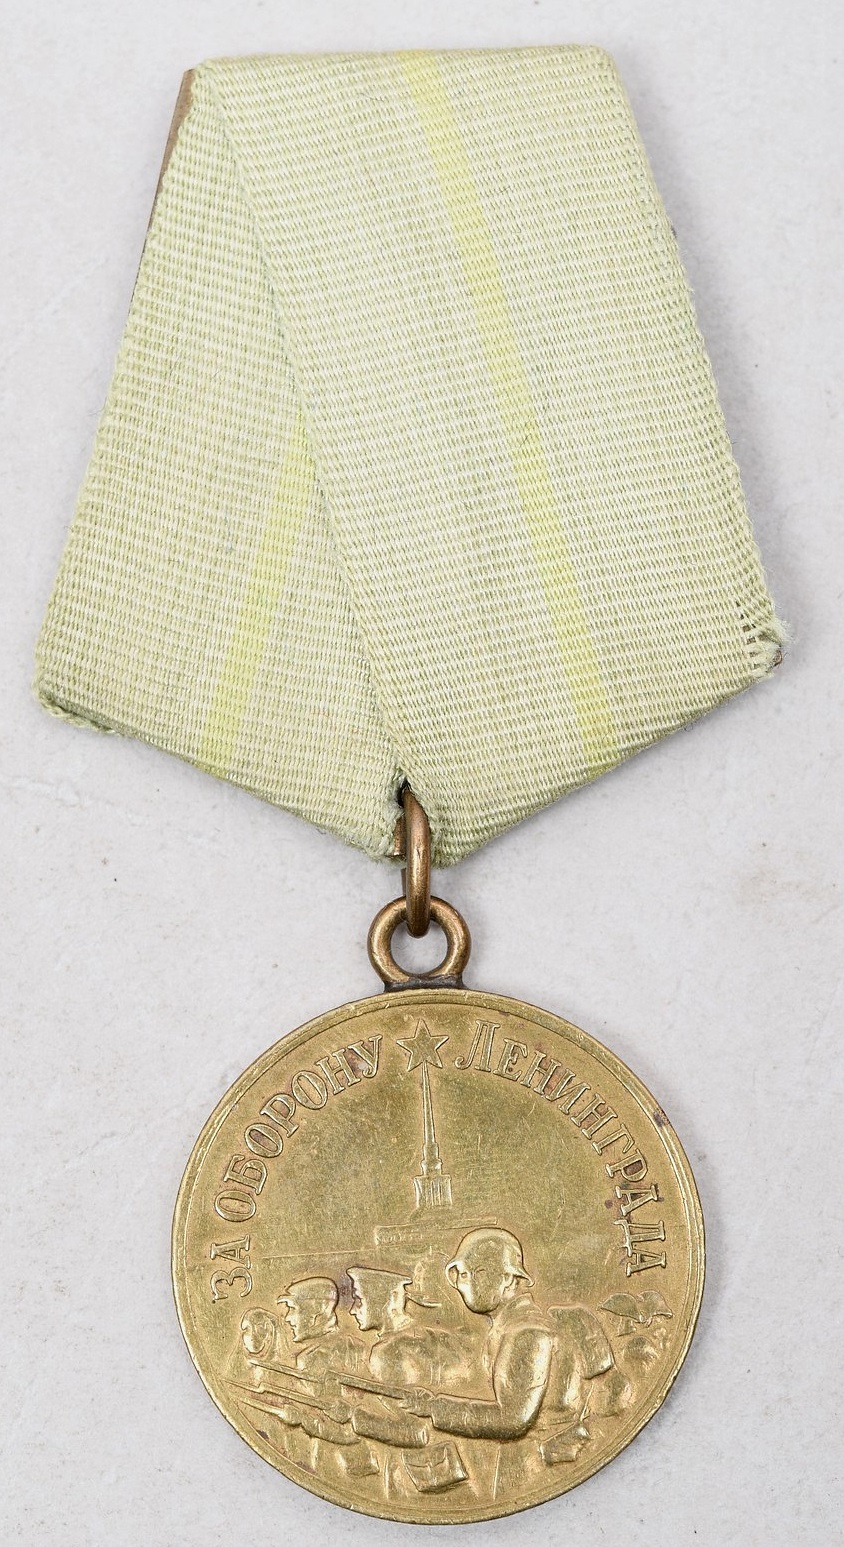 Russia WWII Medal for the Defense of Leningrad Variation 1